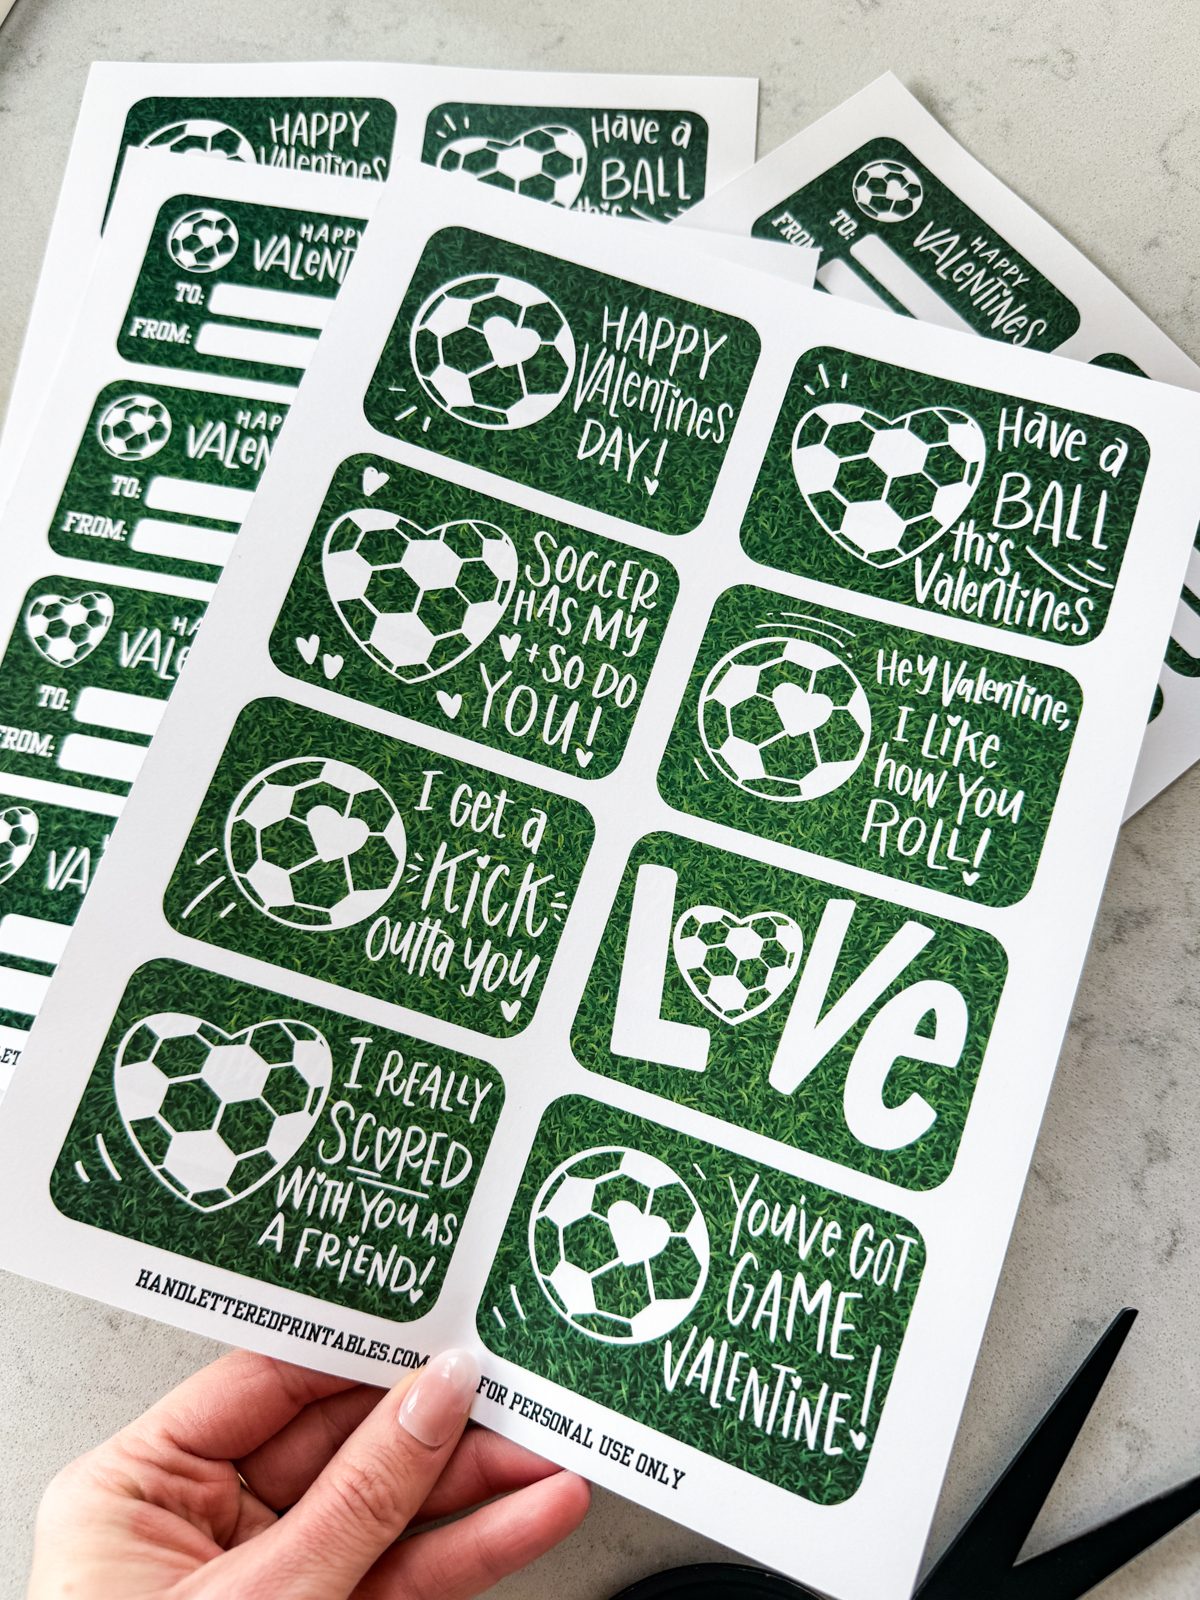 image shows soccer themed valentines cards printed in full sheets, ready to be cut to size valentines have a heart shaped soccer ball and a soccer ball with a heart on it and a grass background. valentines puns and sentiments include: happy valentines day, have a ball this valentines, hey valentine i like how you roll, soccer has my heart and so do you, i get a kick outta you, love (with a heart soccerball as the o), you've got game valentine, and i really scored with you as a friend reverse reads 'happy valentines' with room for to and from names. soccer/ american football